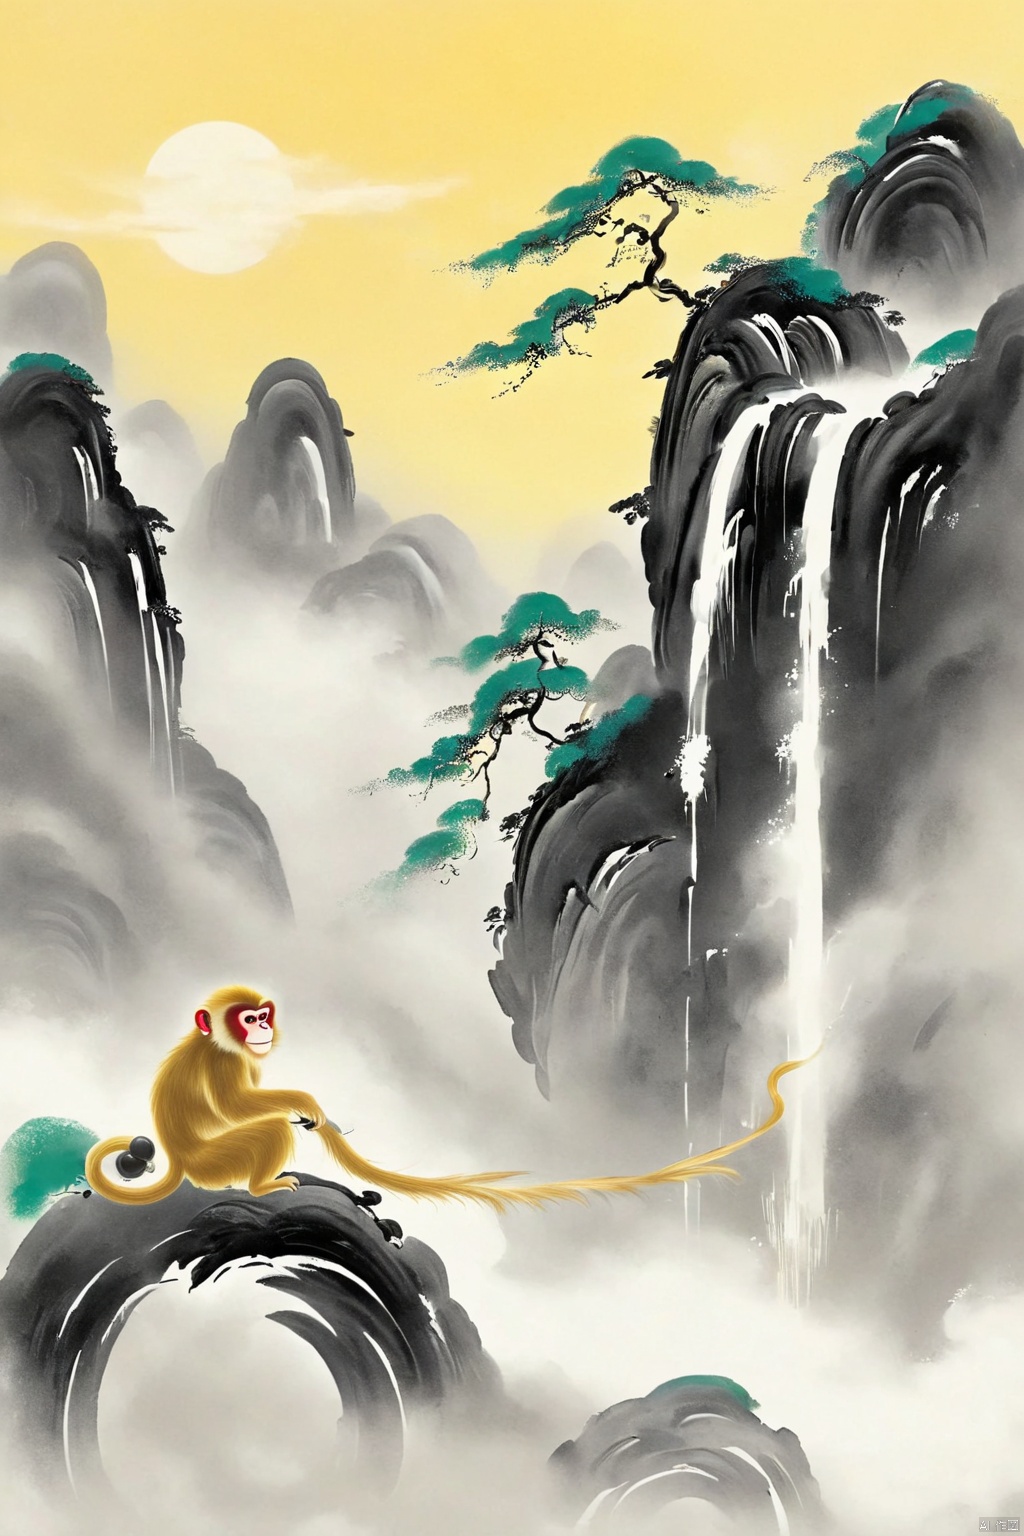 The golden monkey rises with a thousand-catty rod, and the jade universe clears up ten thousand miles of dust.